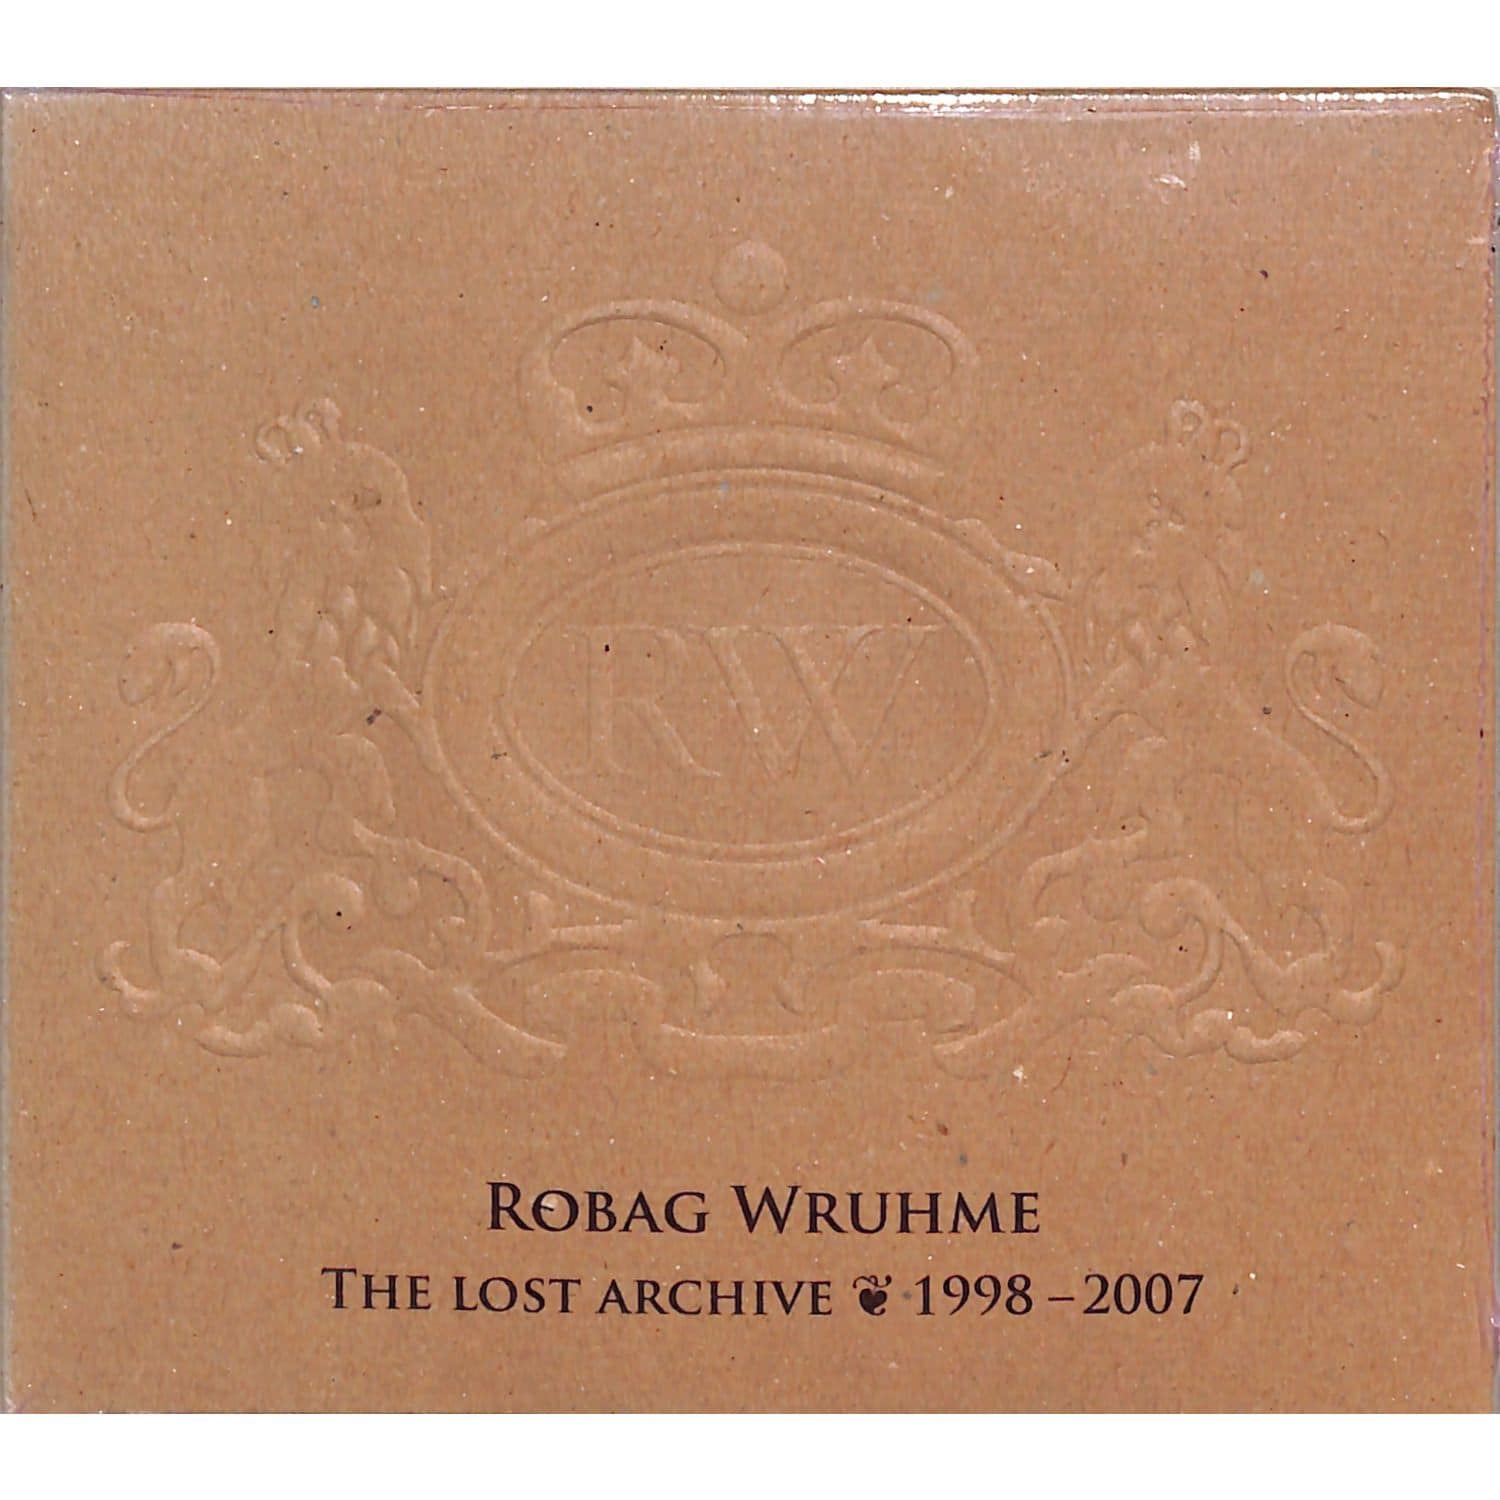 Robag Wruhme - THE LOST ARCHIVE 